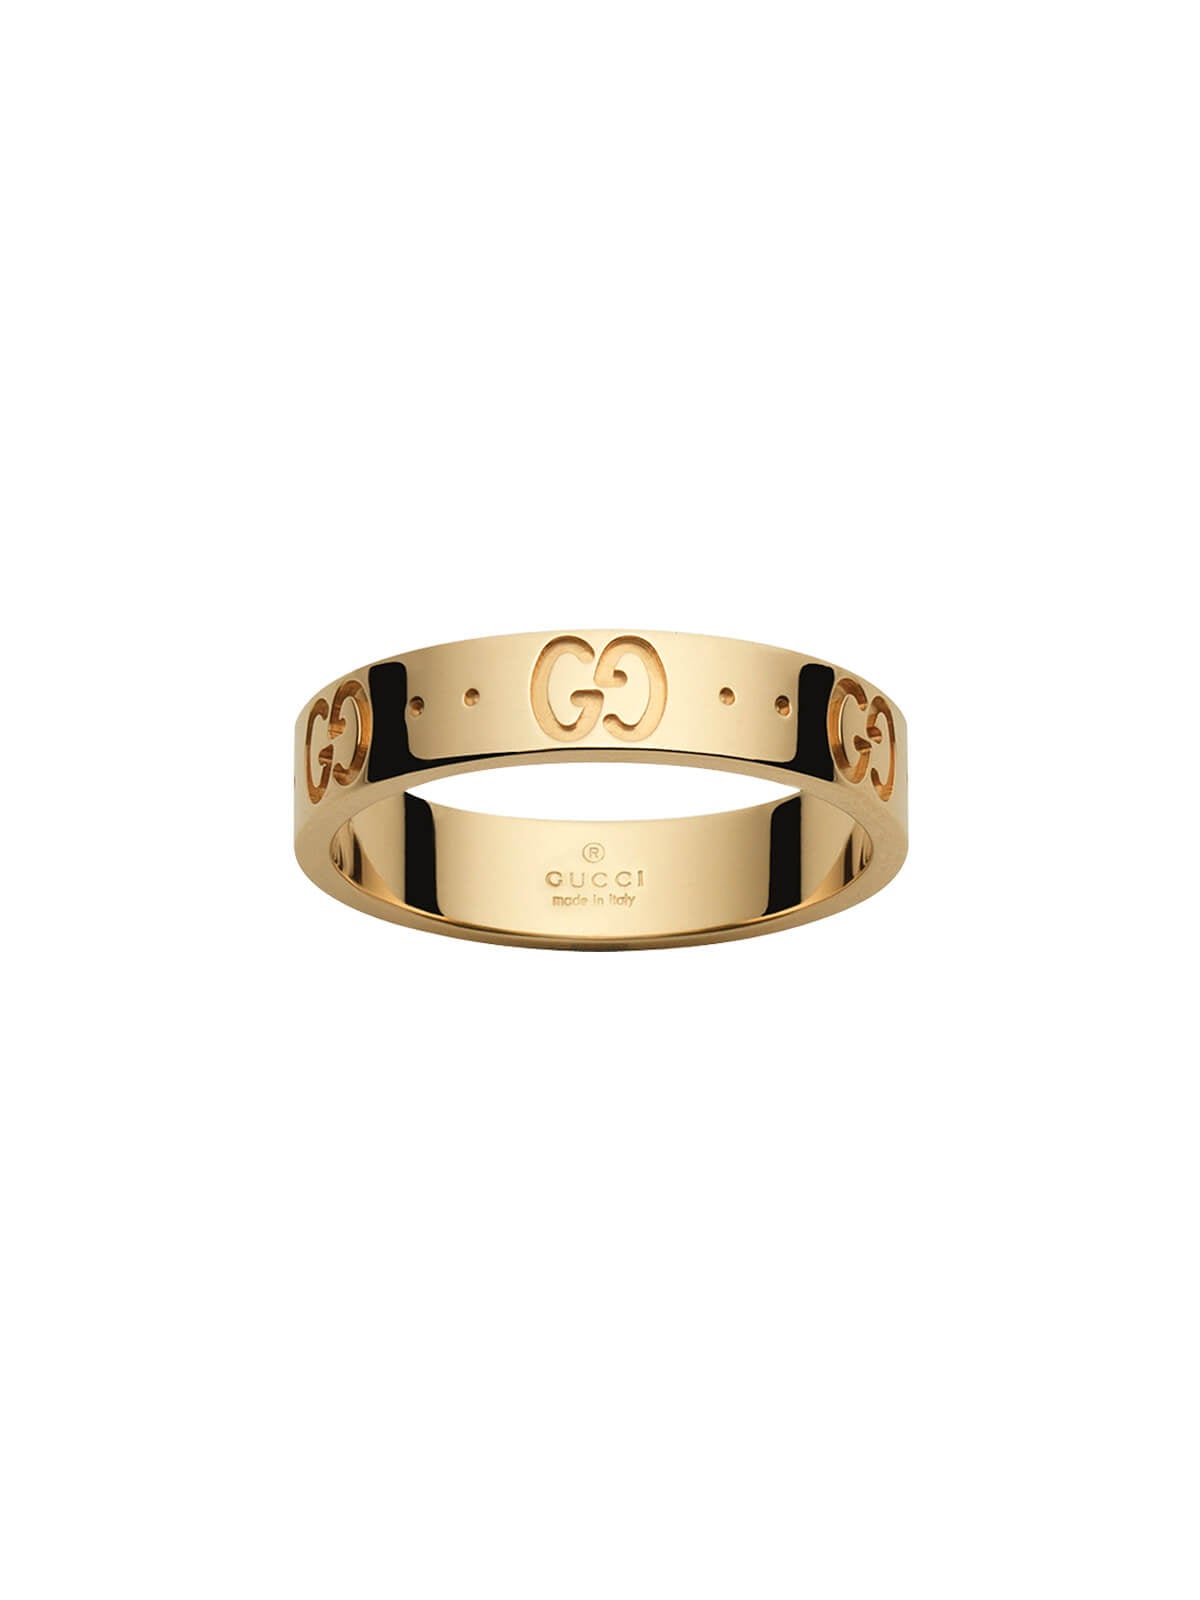 Gucci Icon Ring in 18ct Yellow Gold - Size 14